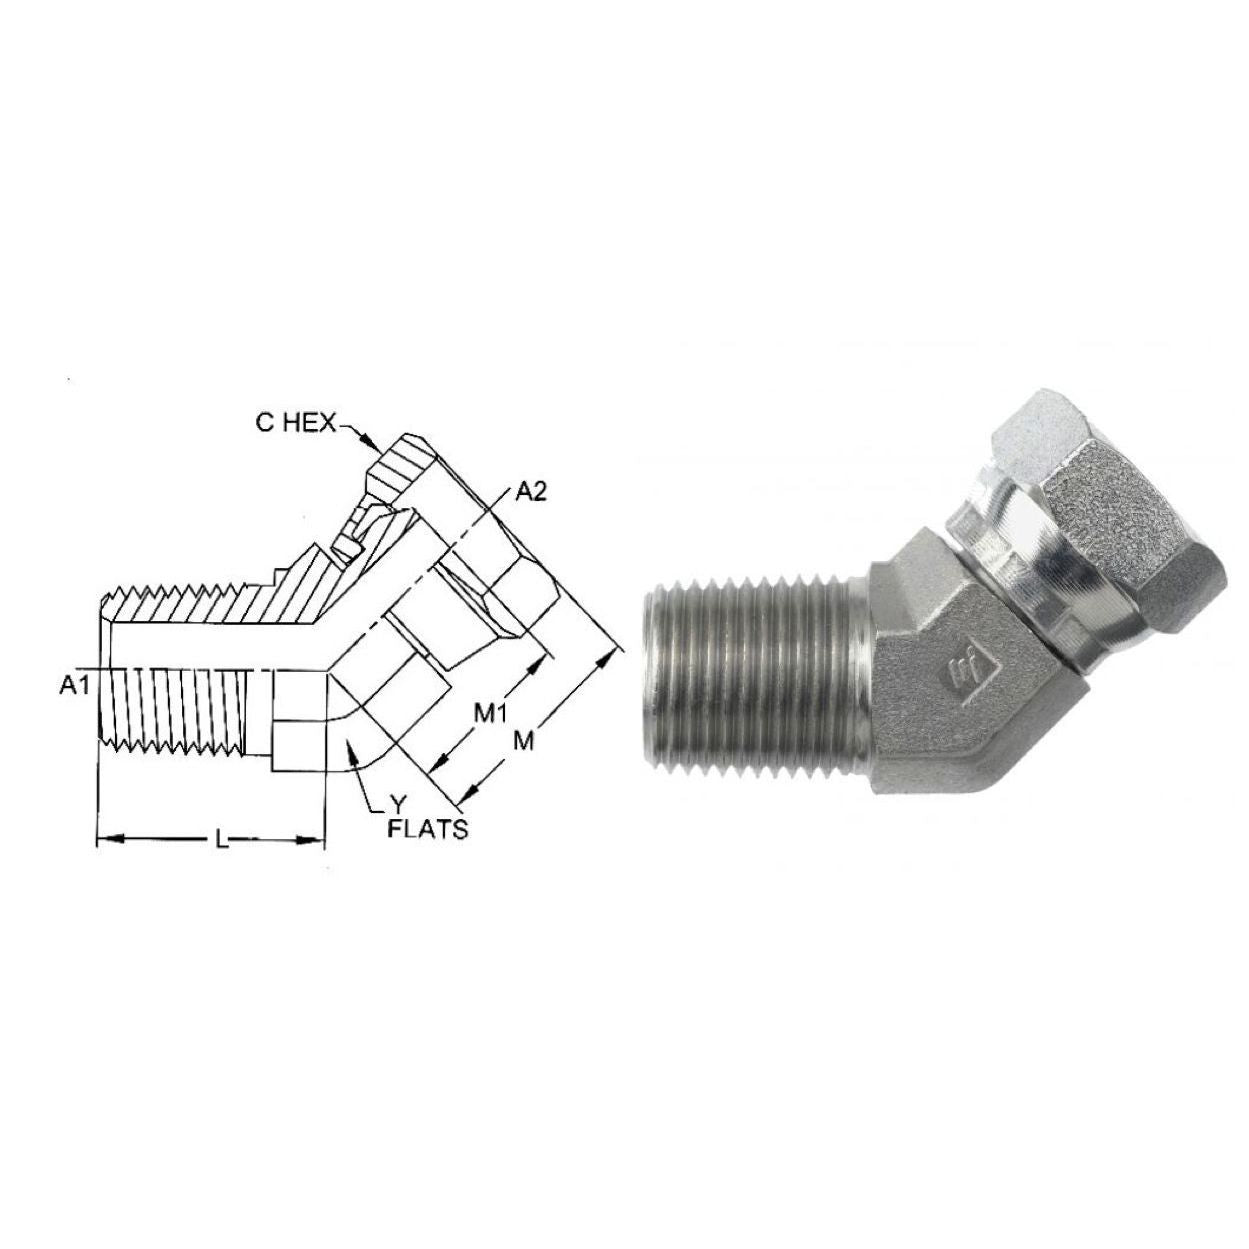 1503-06-06-SS : OneHydraulics 45-Degree Elbow, 0.375 (3/8) Male NPT x 0.375 (3/8) Female NPT Swivel, Stainless Steel, 4800psi